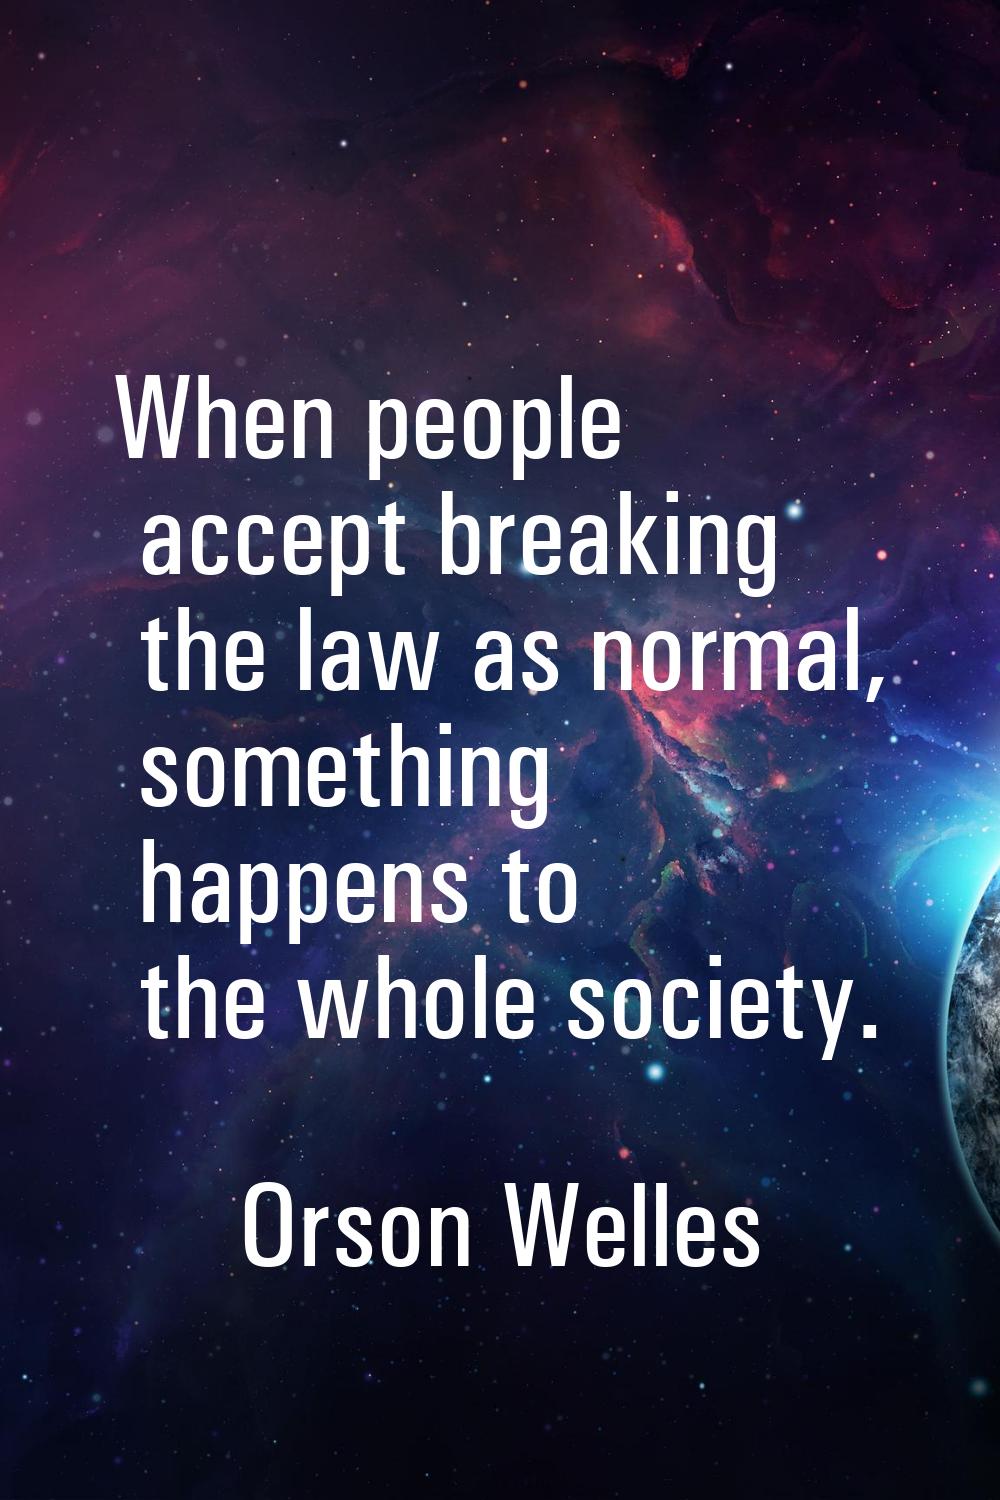 When people accept breaking the law as normal, something happens to the whole society.